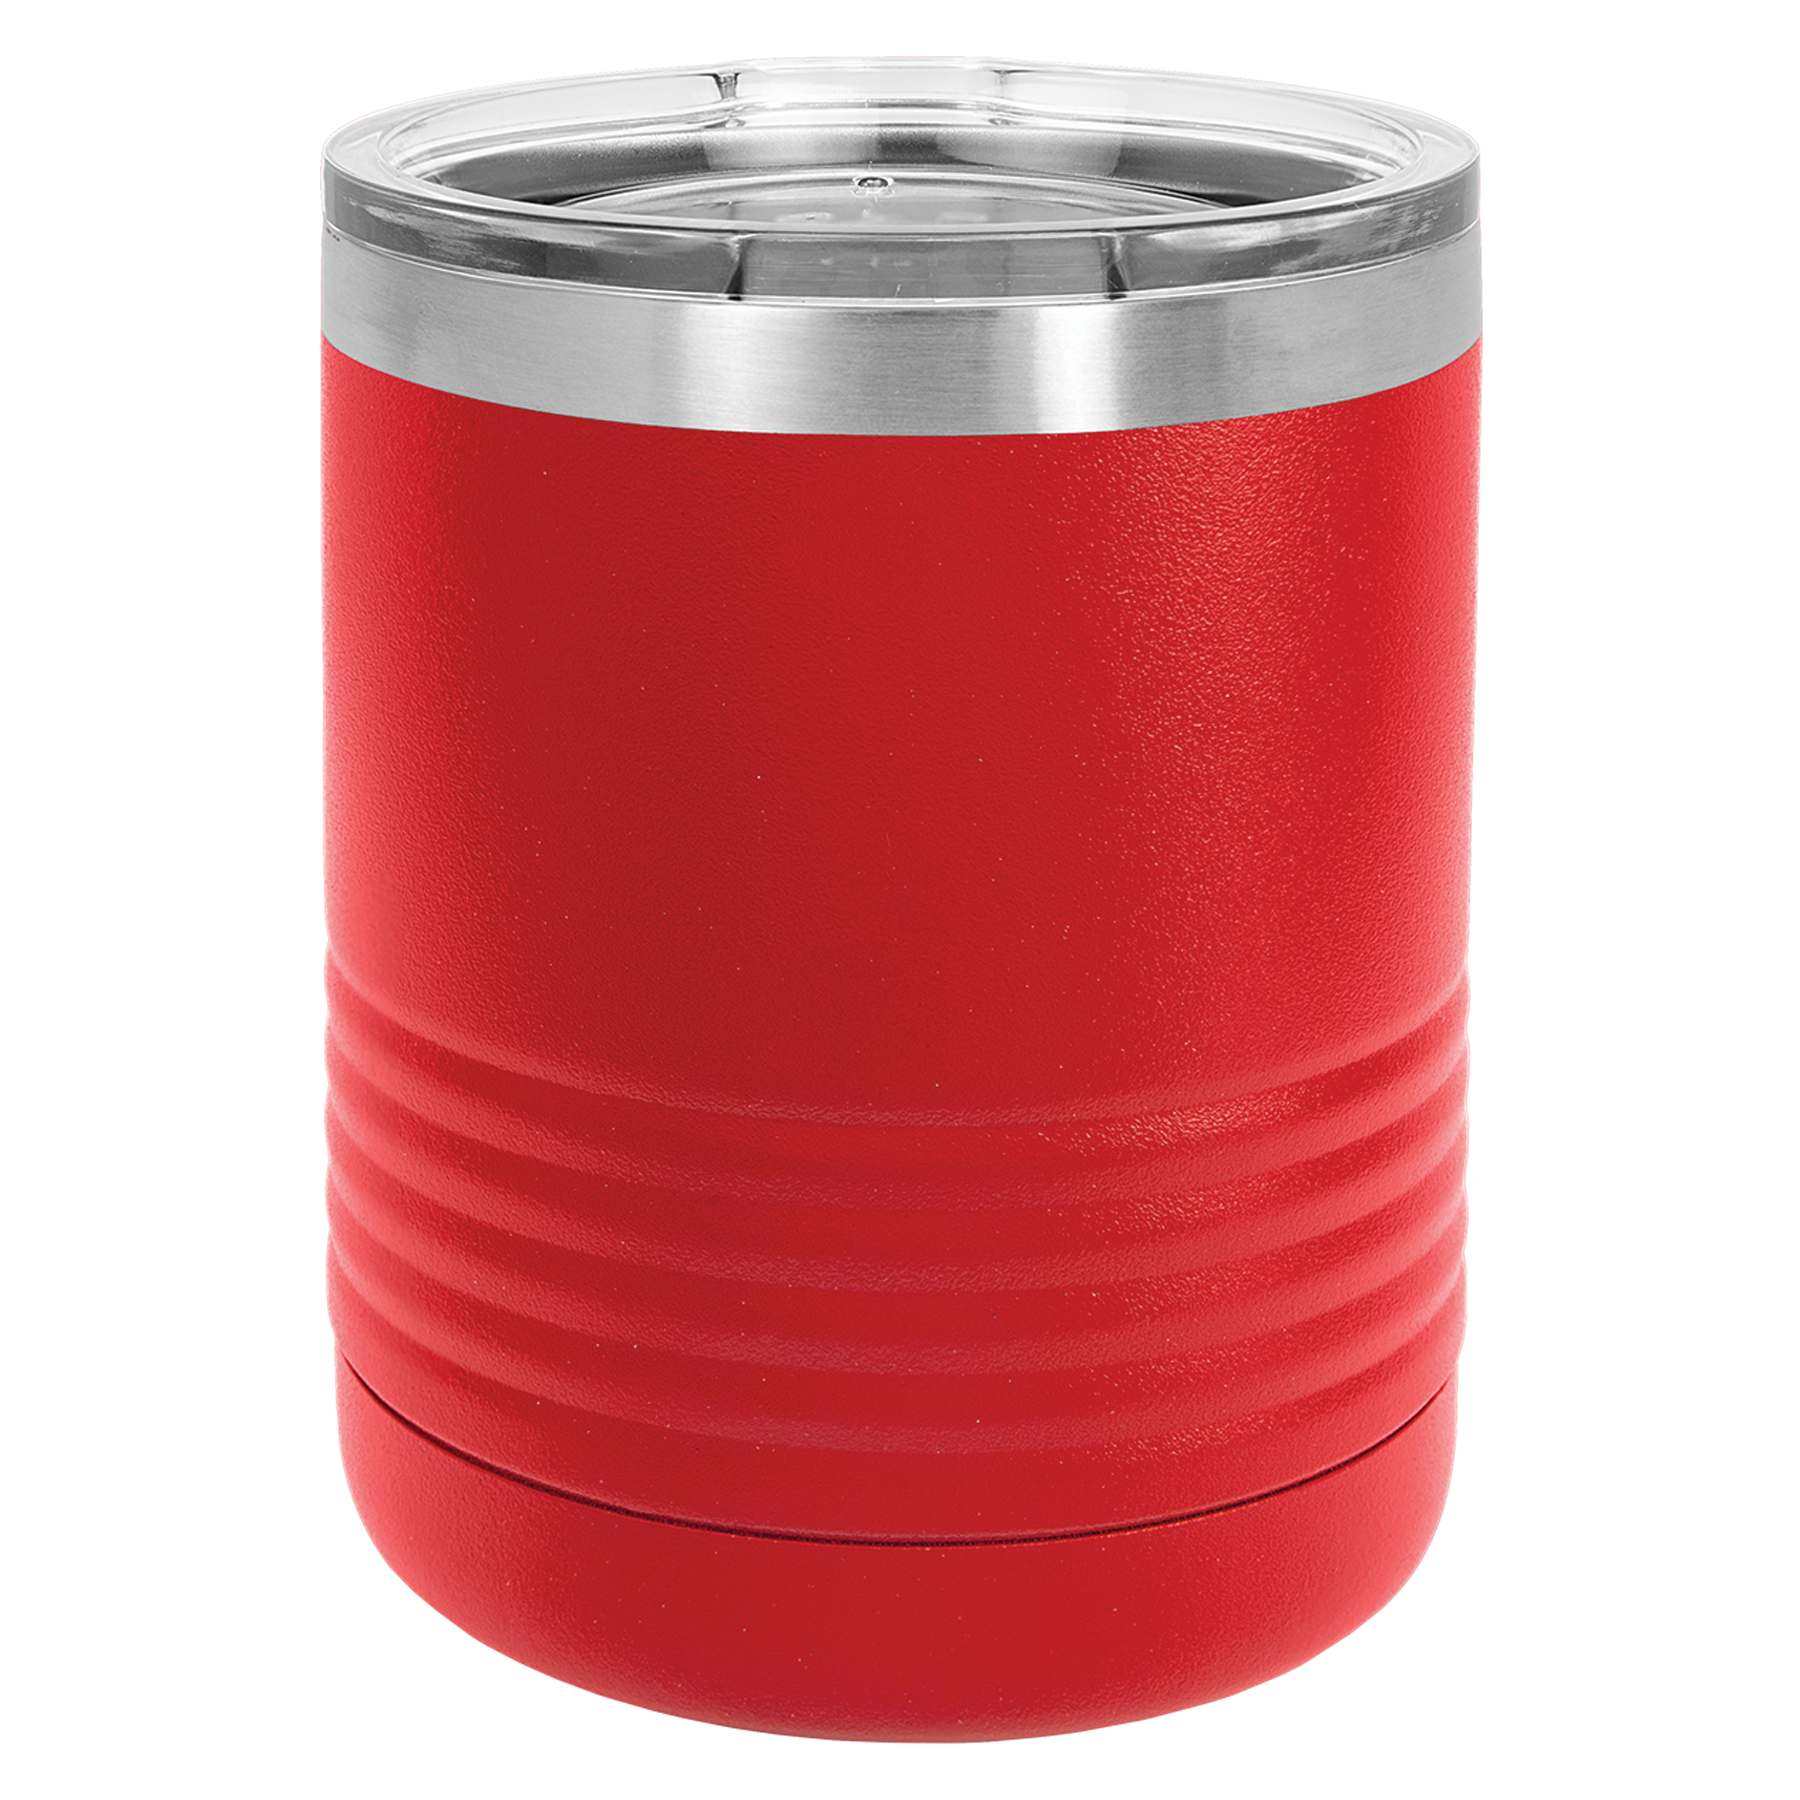 Engraved Red 10 oz. Lowball Tumbler. Double-wall vacuum insulation with a clear lid. It is 2X heat & cold resistant. Is lead free. Polar Camels are made from 18/8 gauge stainless steel (18% chromium/8% nickel) - also known as Type 304 Food Grade. Great gift for anyone's collection